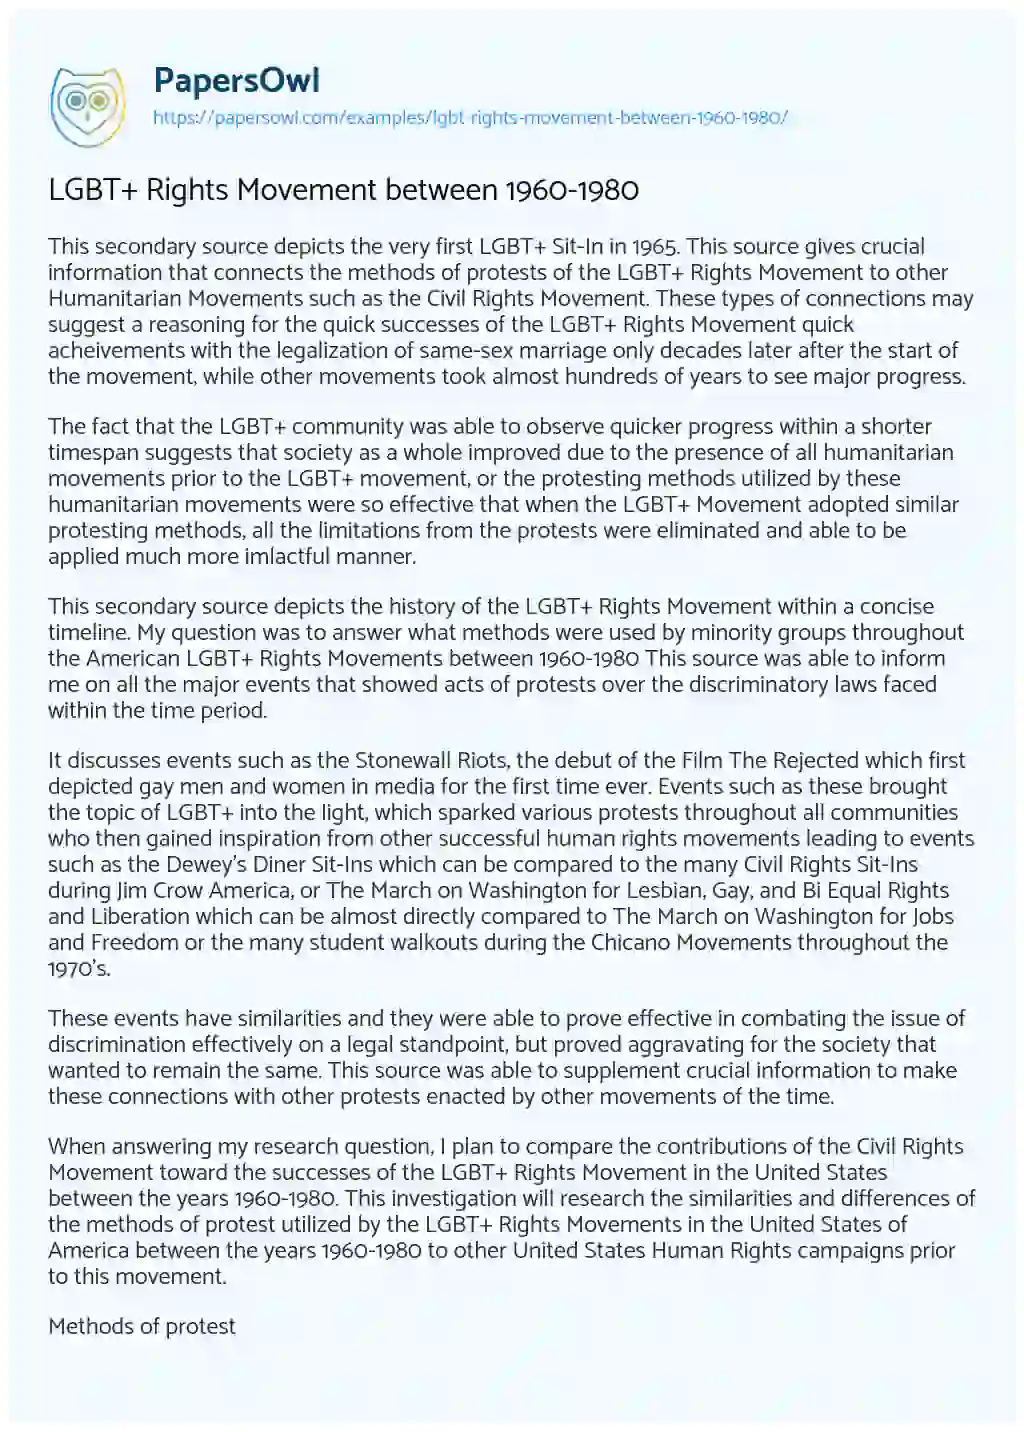 Essay on LGBT+ Rights Movement between 1960-1980